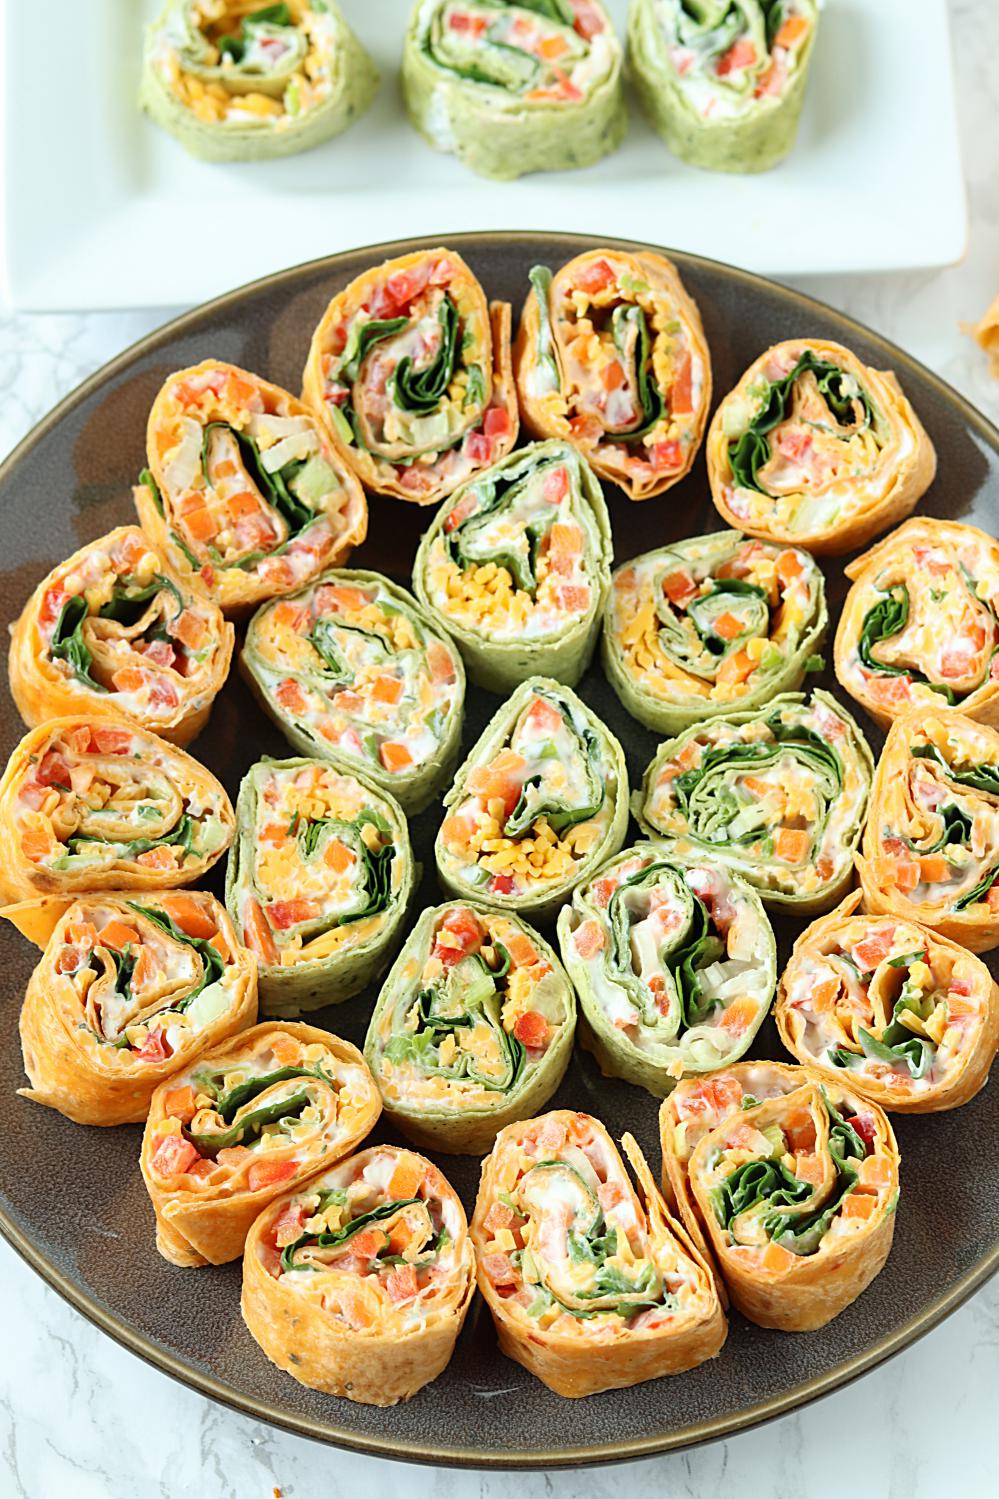 Whether you need brunch recipes or the perfect take-along picnic recipe, pinwheels are the name of the game. Here are our 5 favorite sweet and savory pinwheels recipes for a quick and tasty snack.